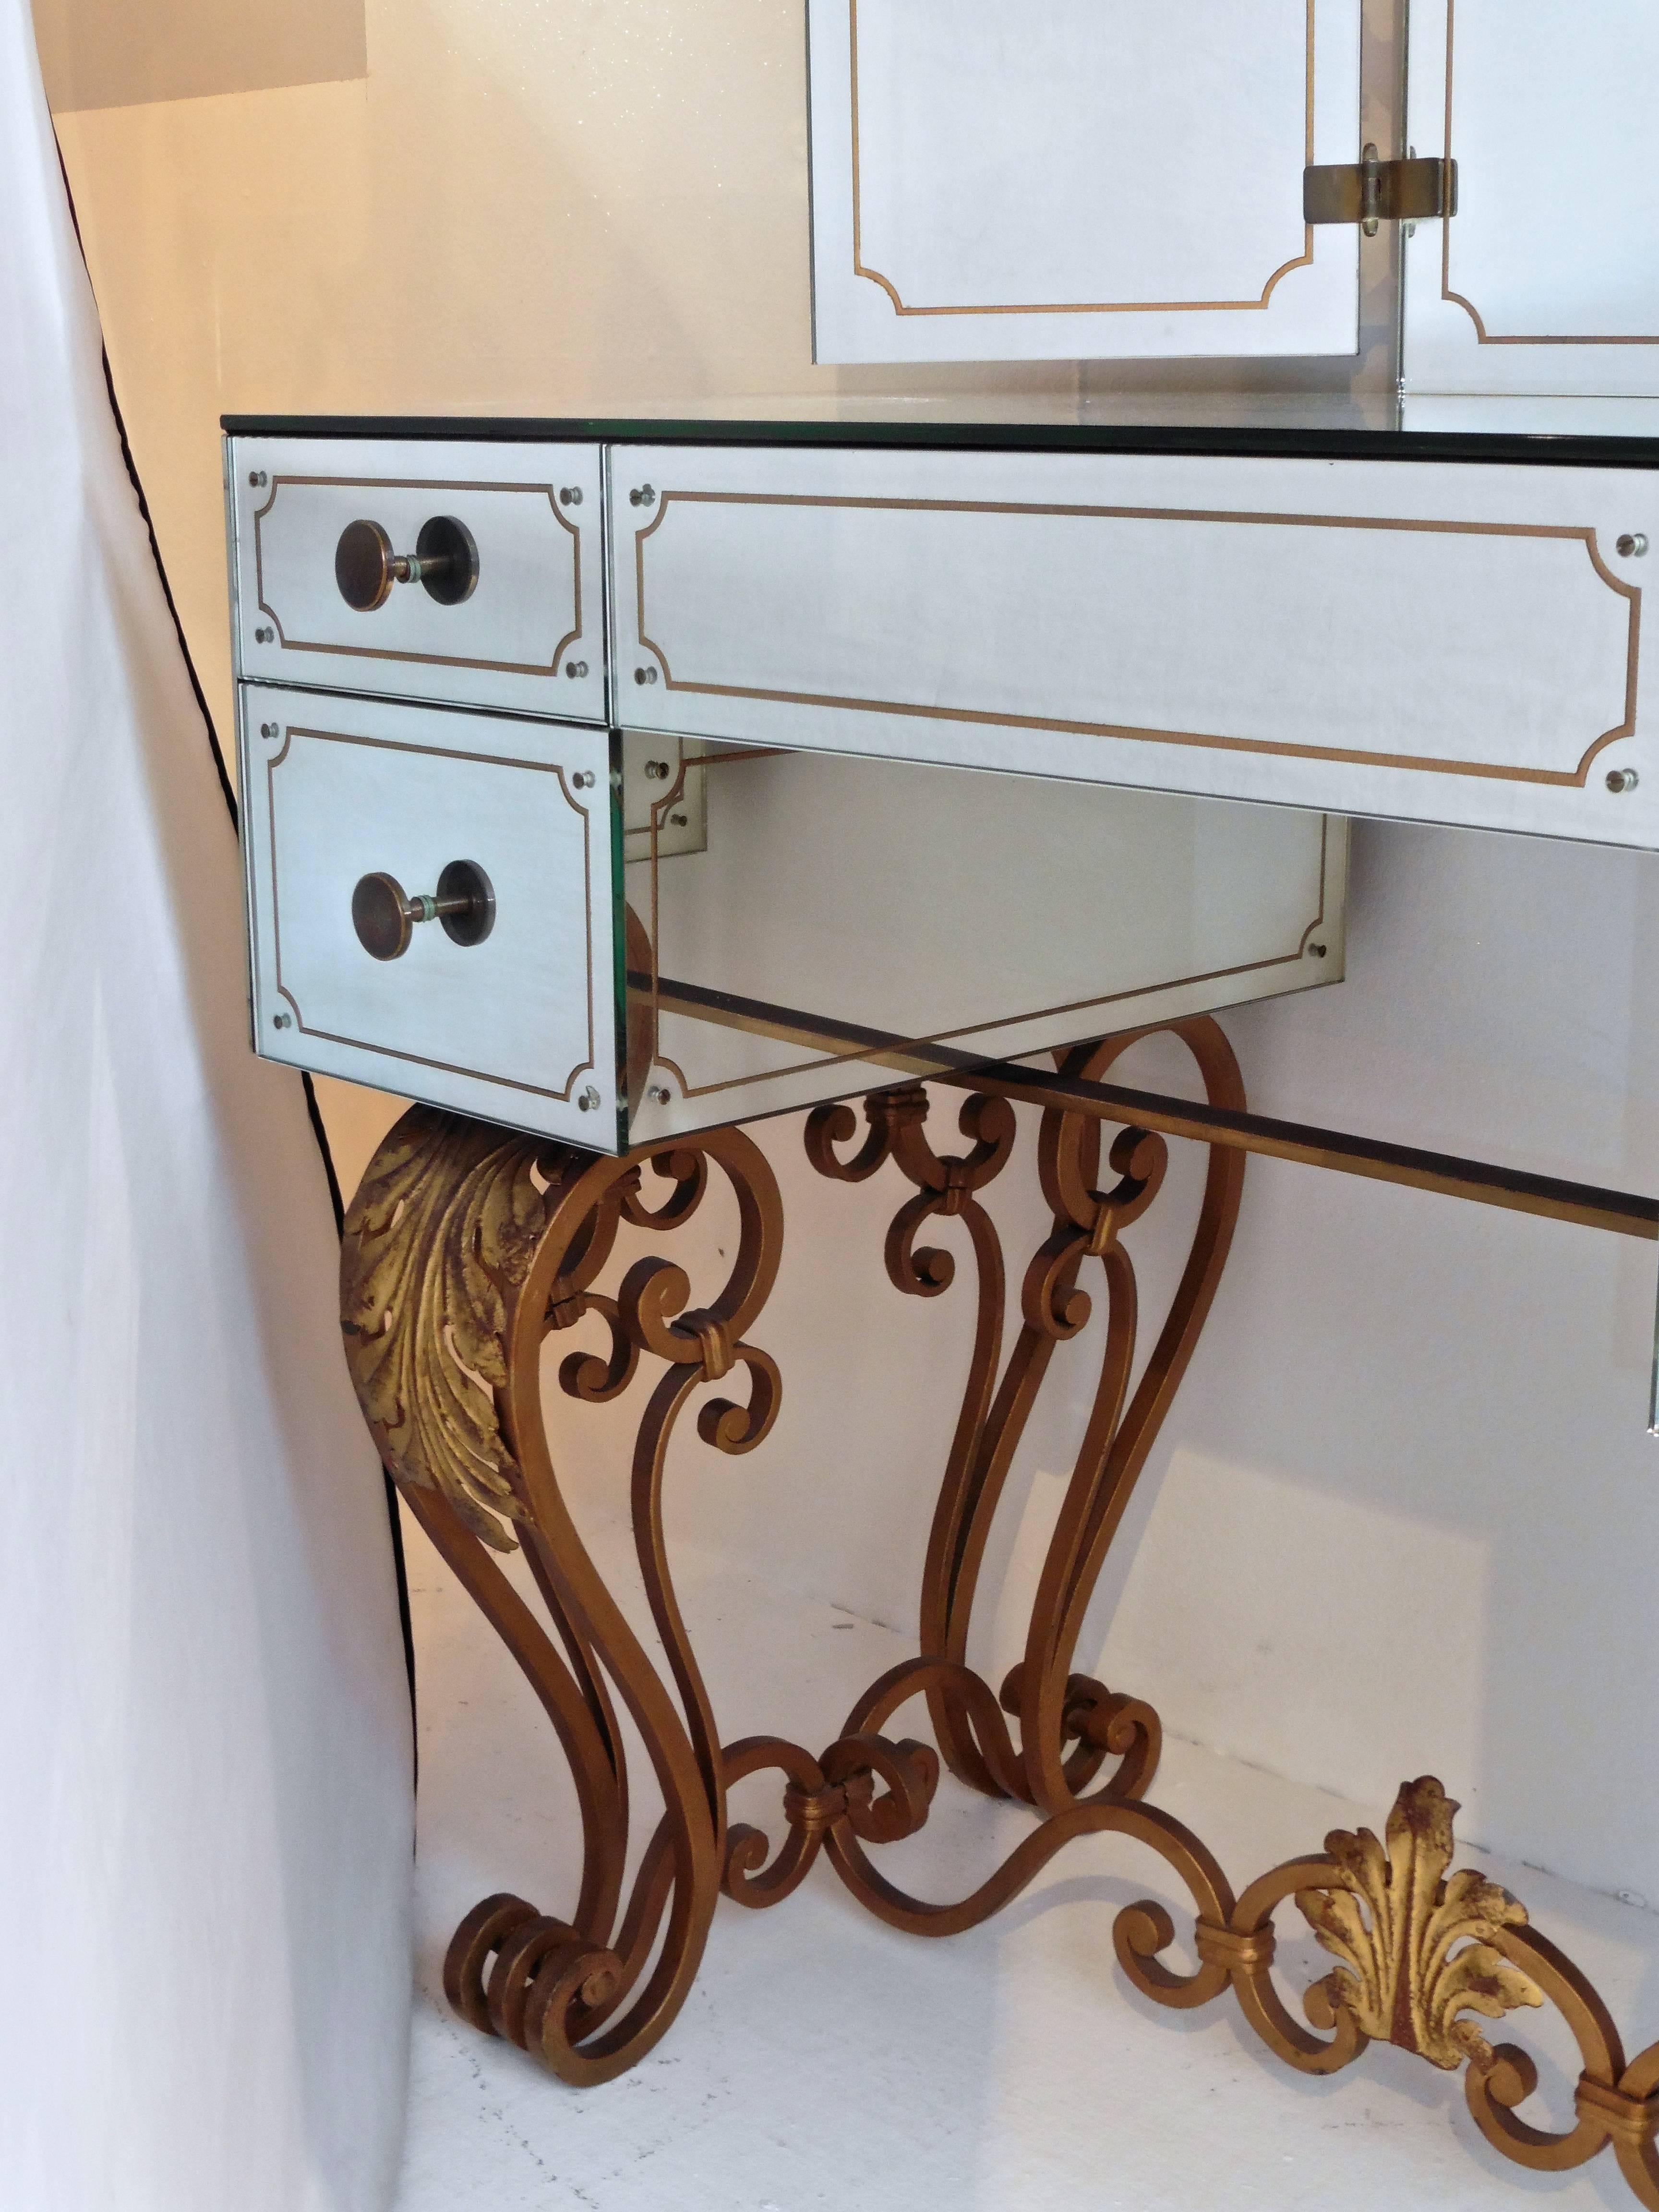 An extremely decorative French mirrored dressing table, circa 1950. The cabriole legs embellished with gilt acanthus leaves, connected by a stretcher of the same theme. The sides flanked by two drawers, one larger than the other. A three-fold